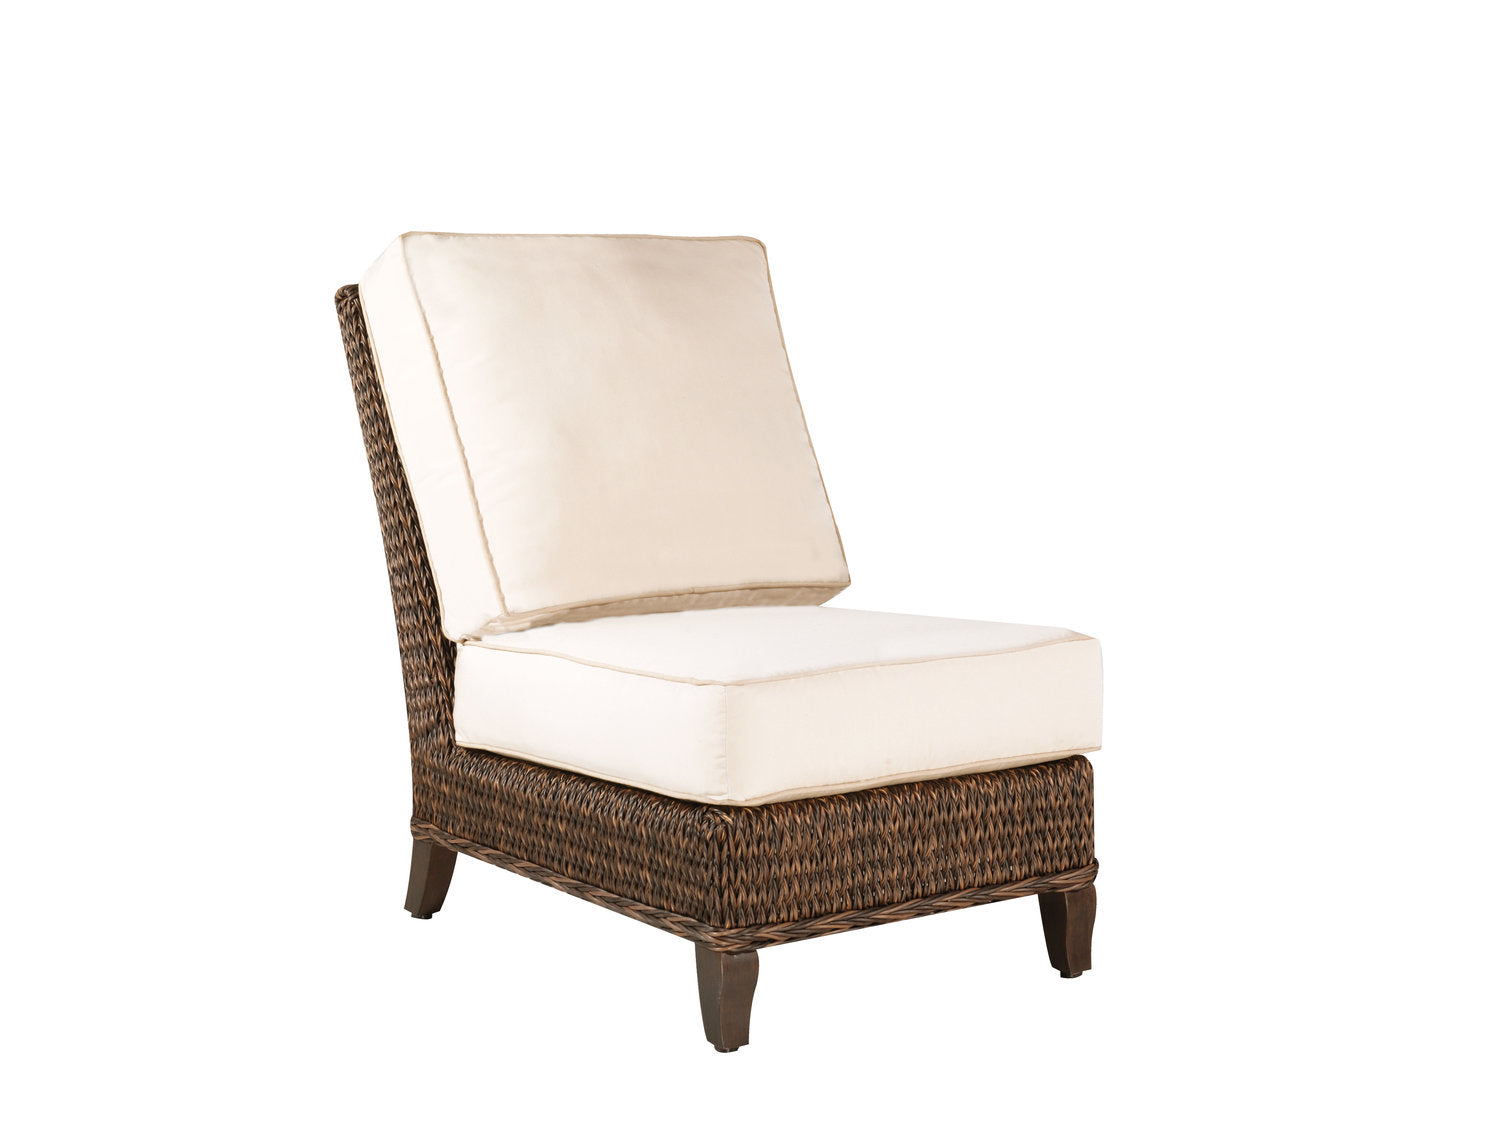 Monticello Armless Chair By Patio Renaissance